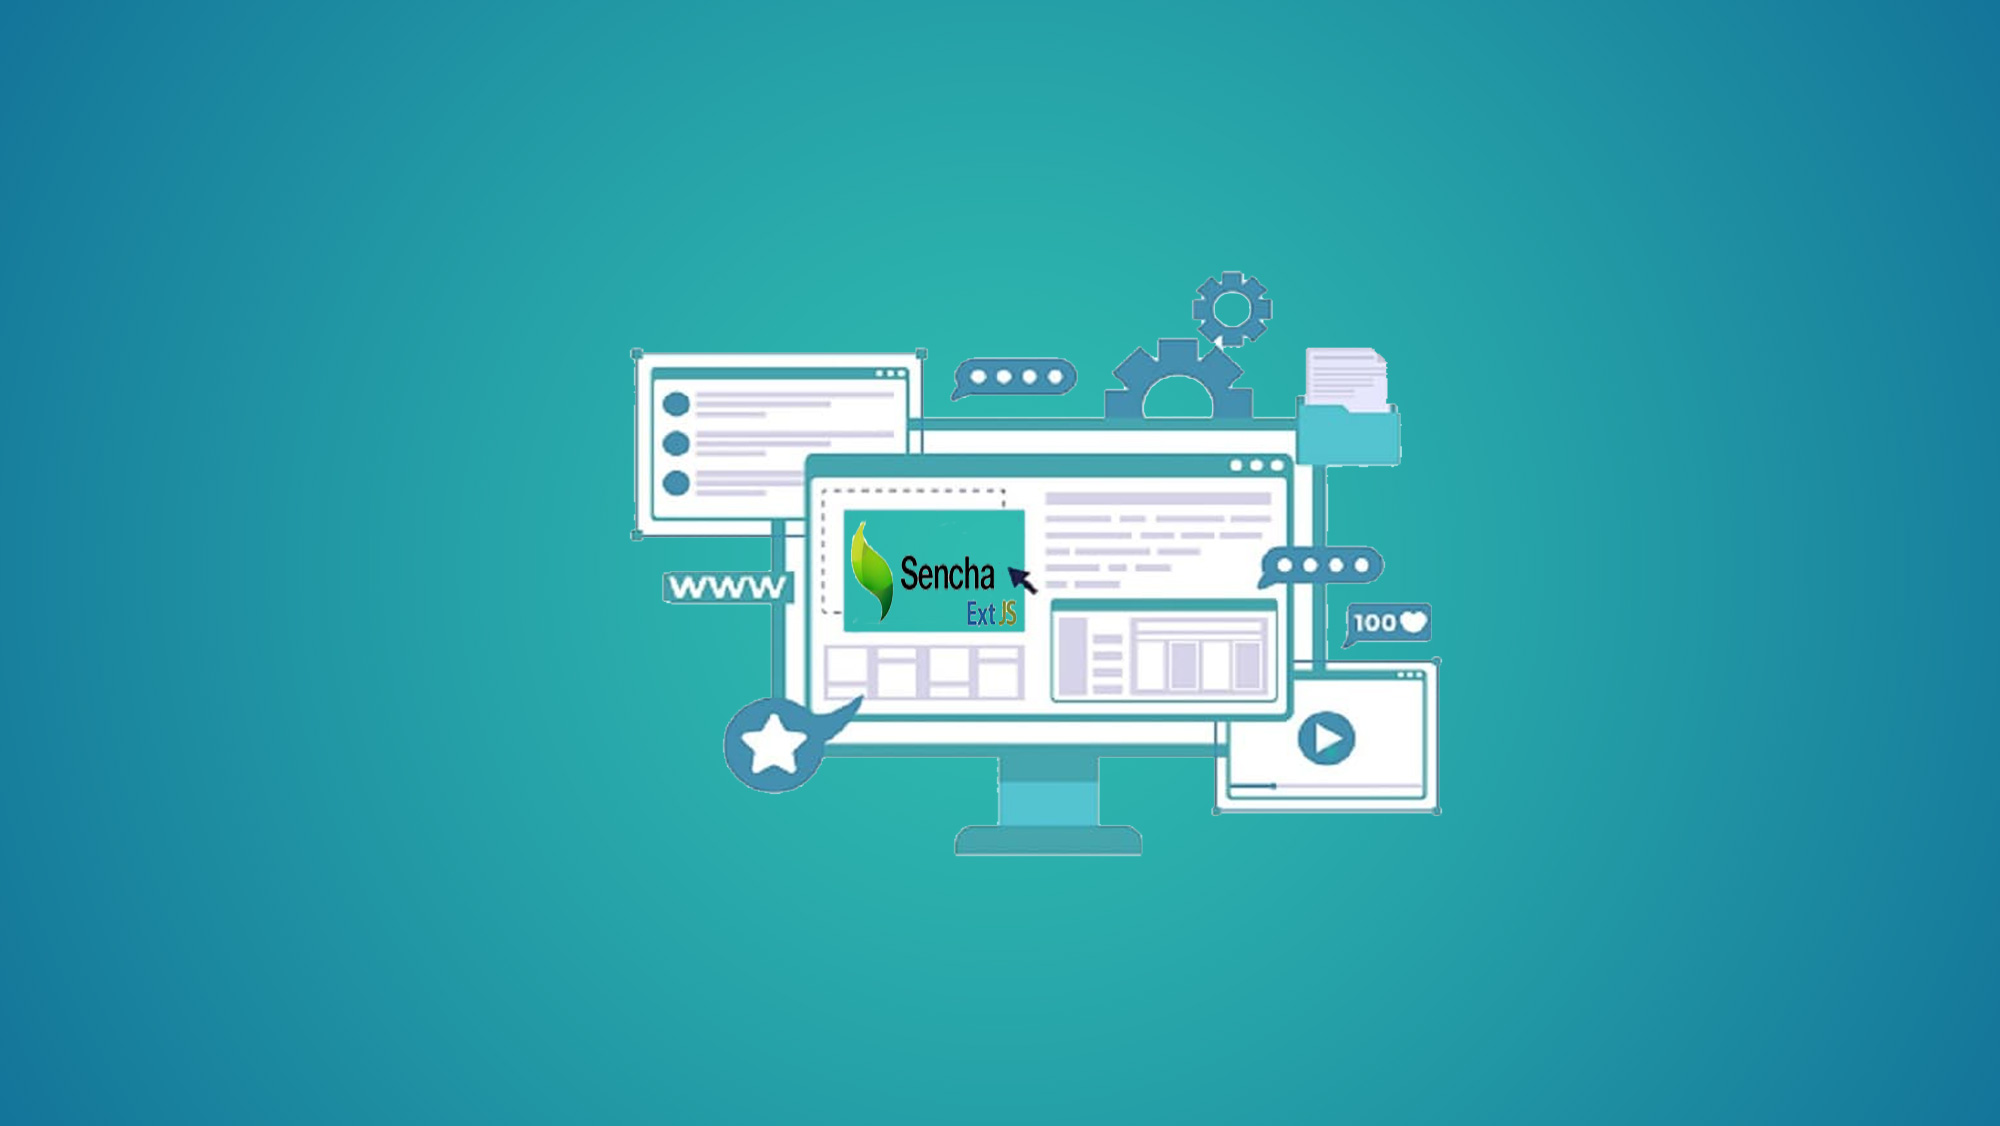 Developing-Robust-Web-Applications-with-ExtJS-Sencha-Training-1